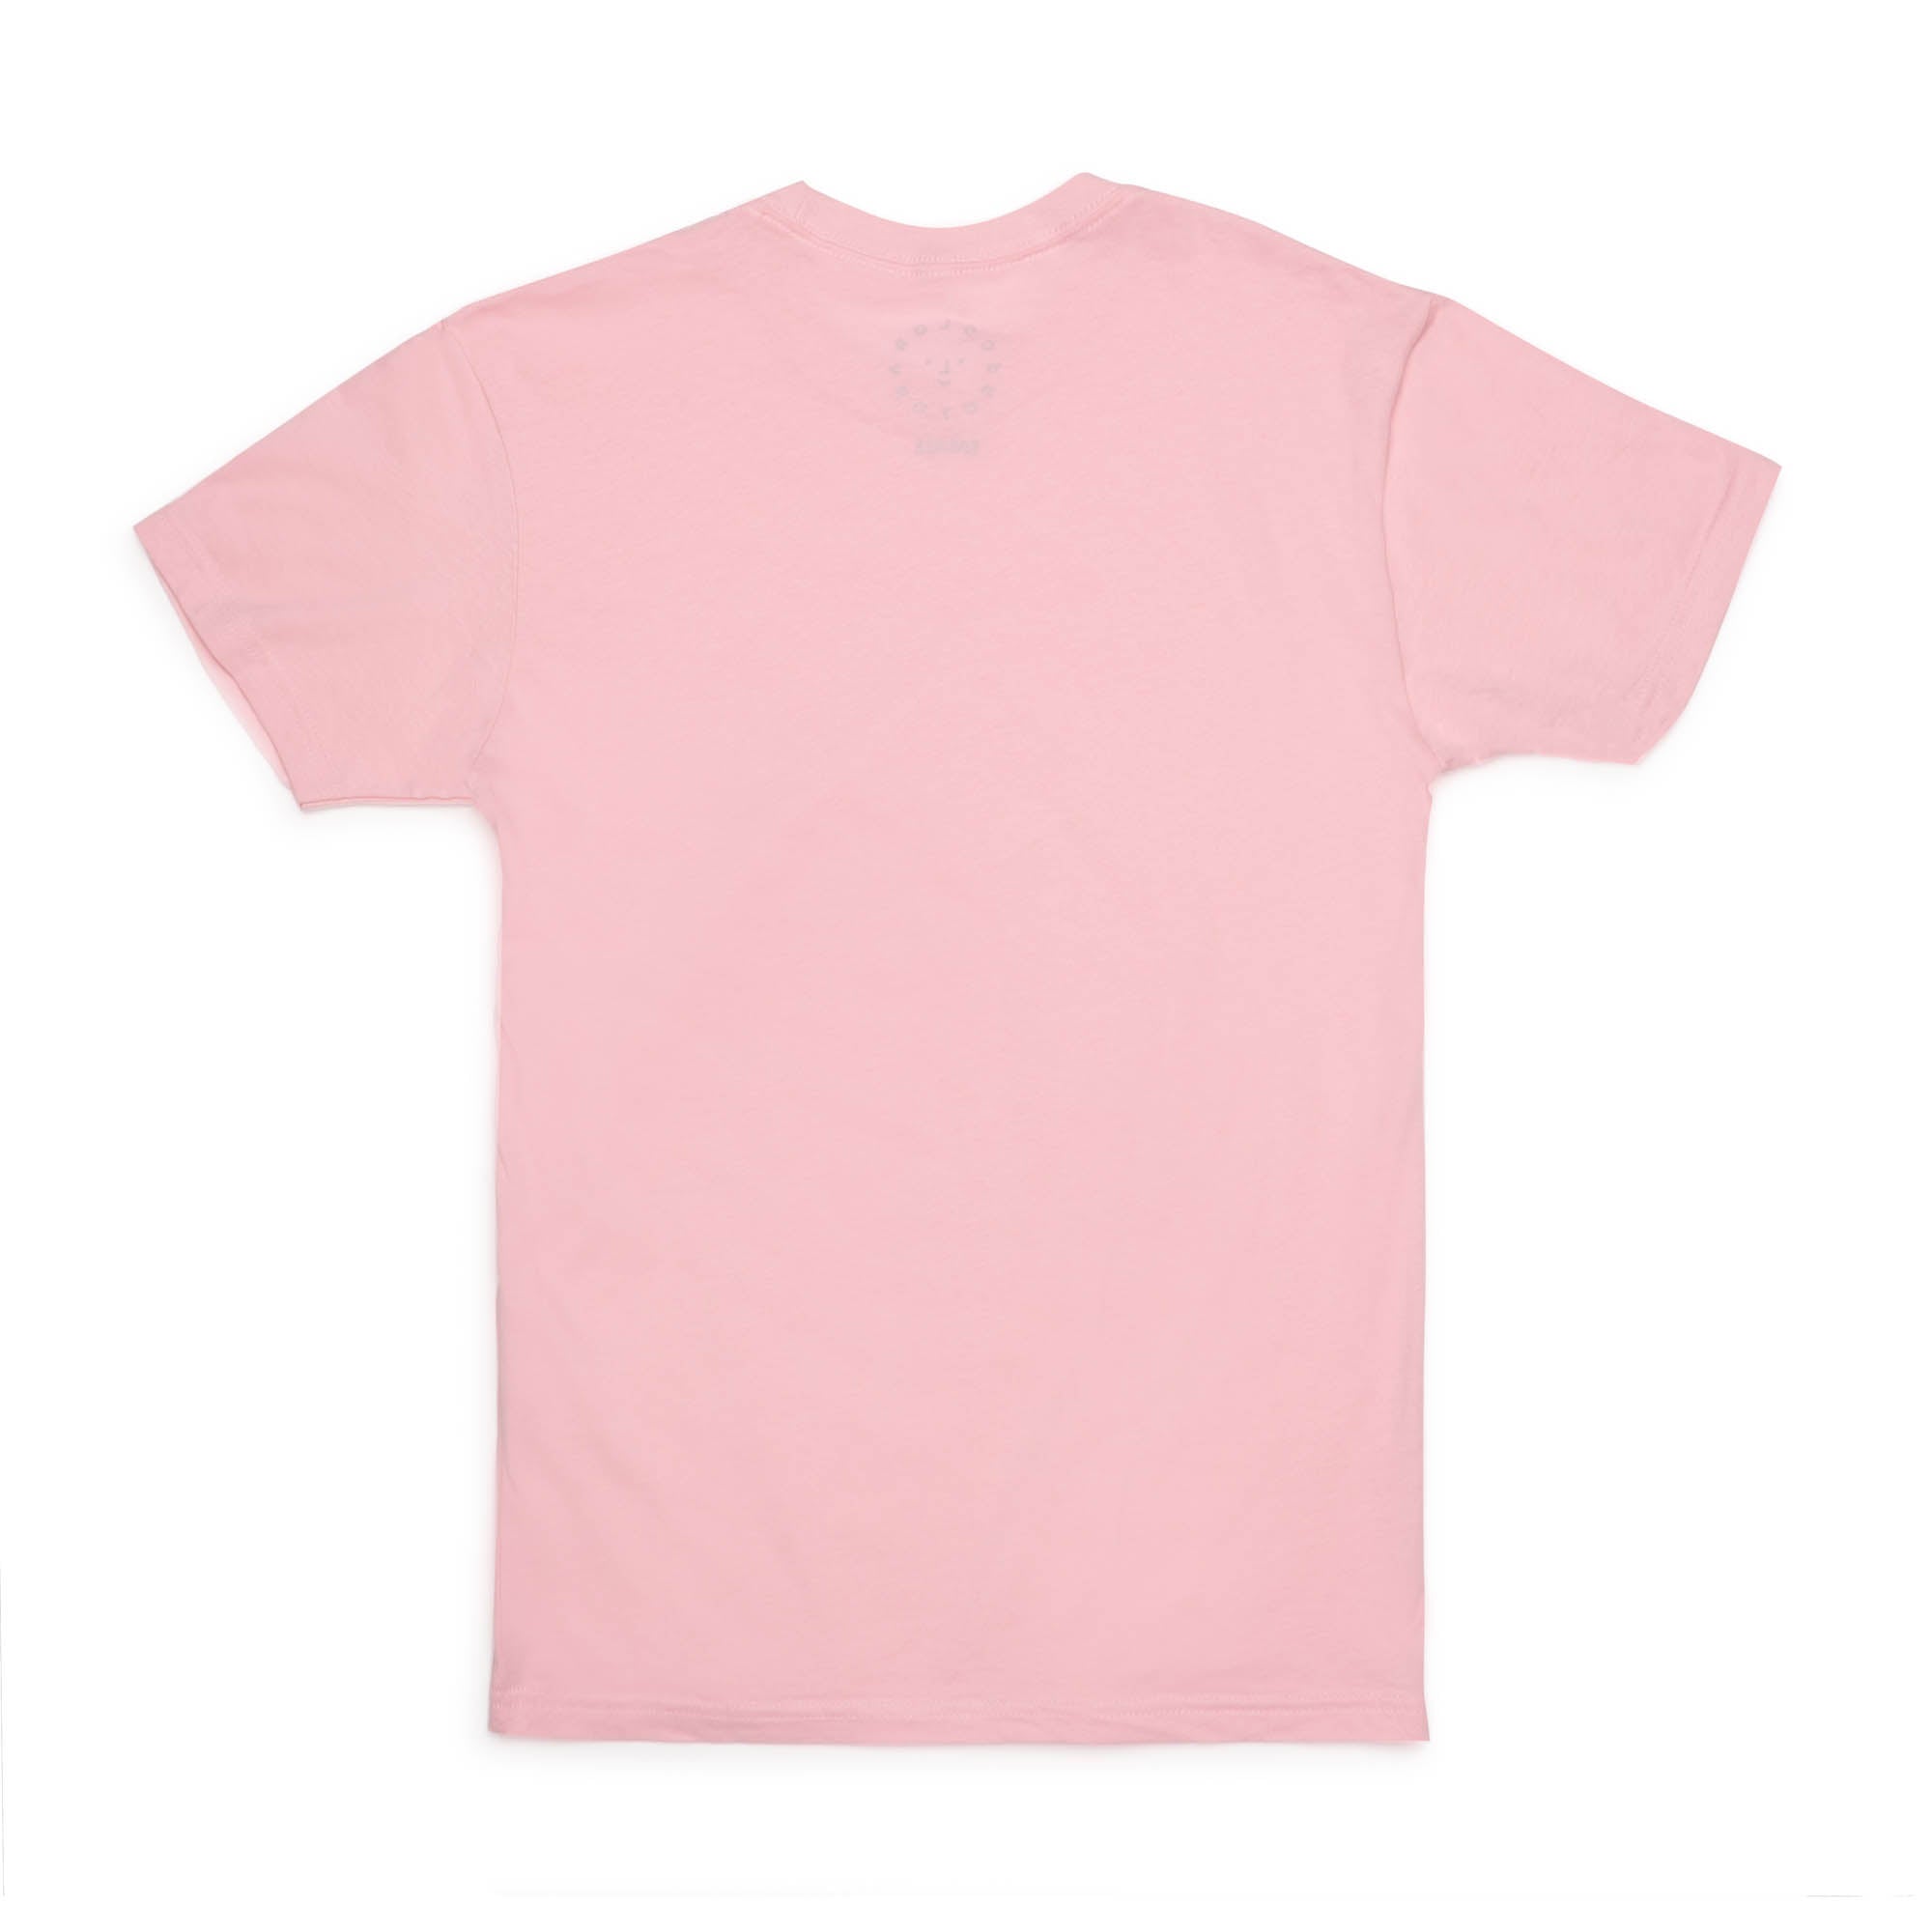 T-shirt with print Color pastel pink - SINSAY - 5907F-03X